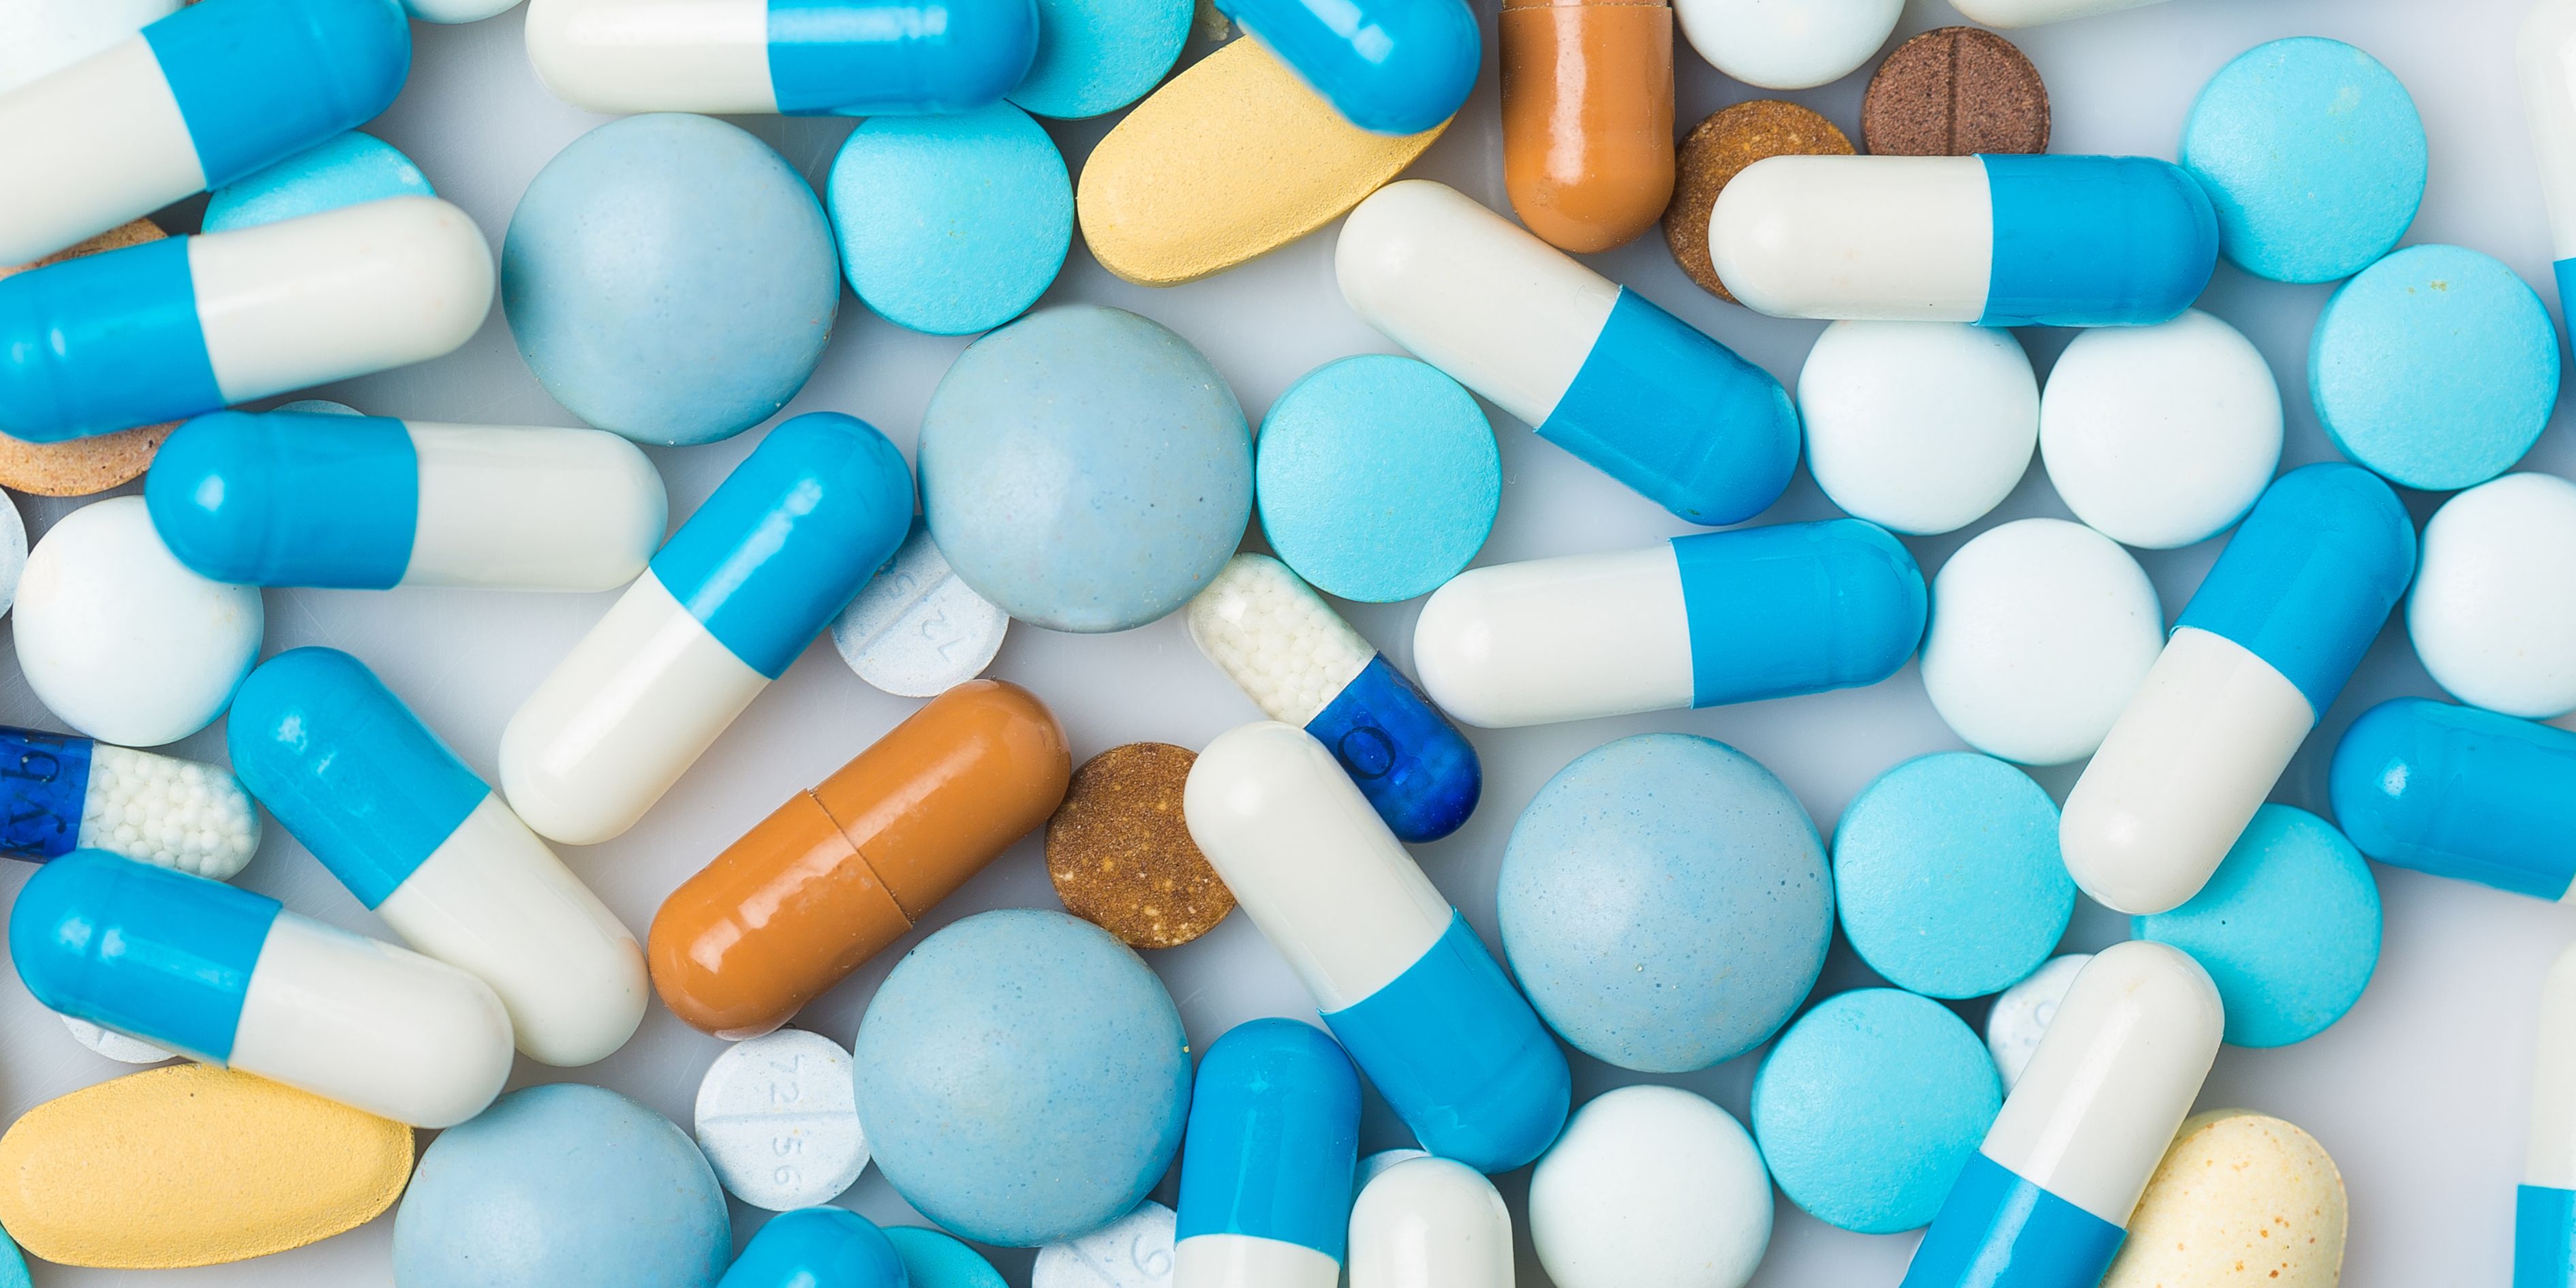 Course Image Introduction to pharmacology for health professional prescribers